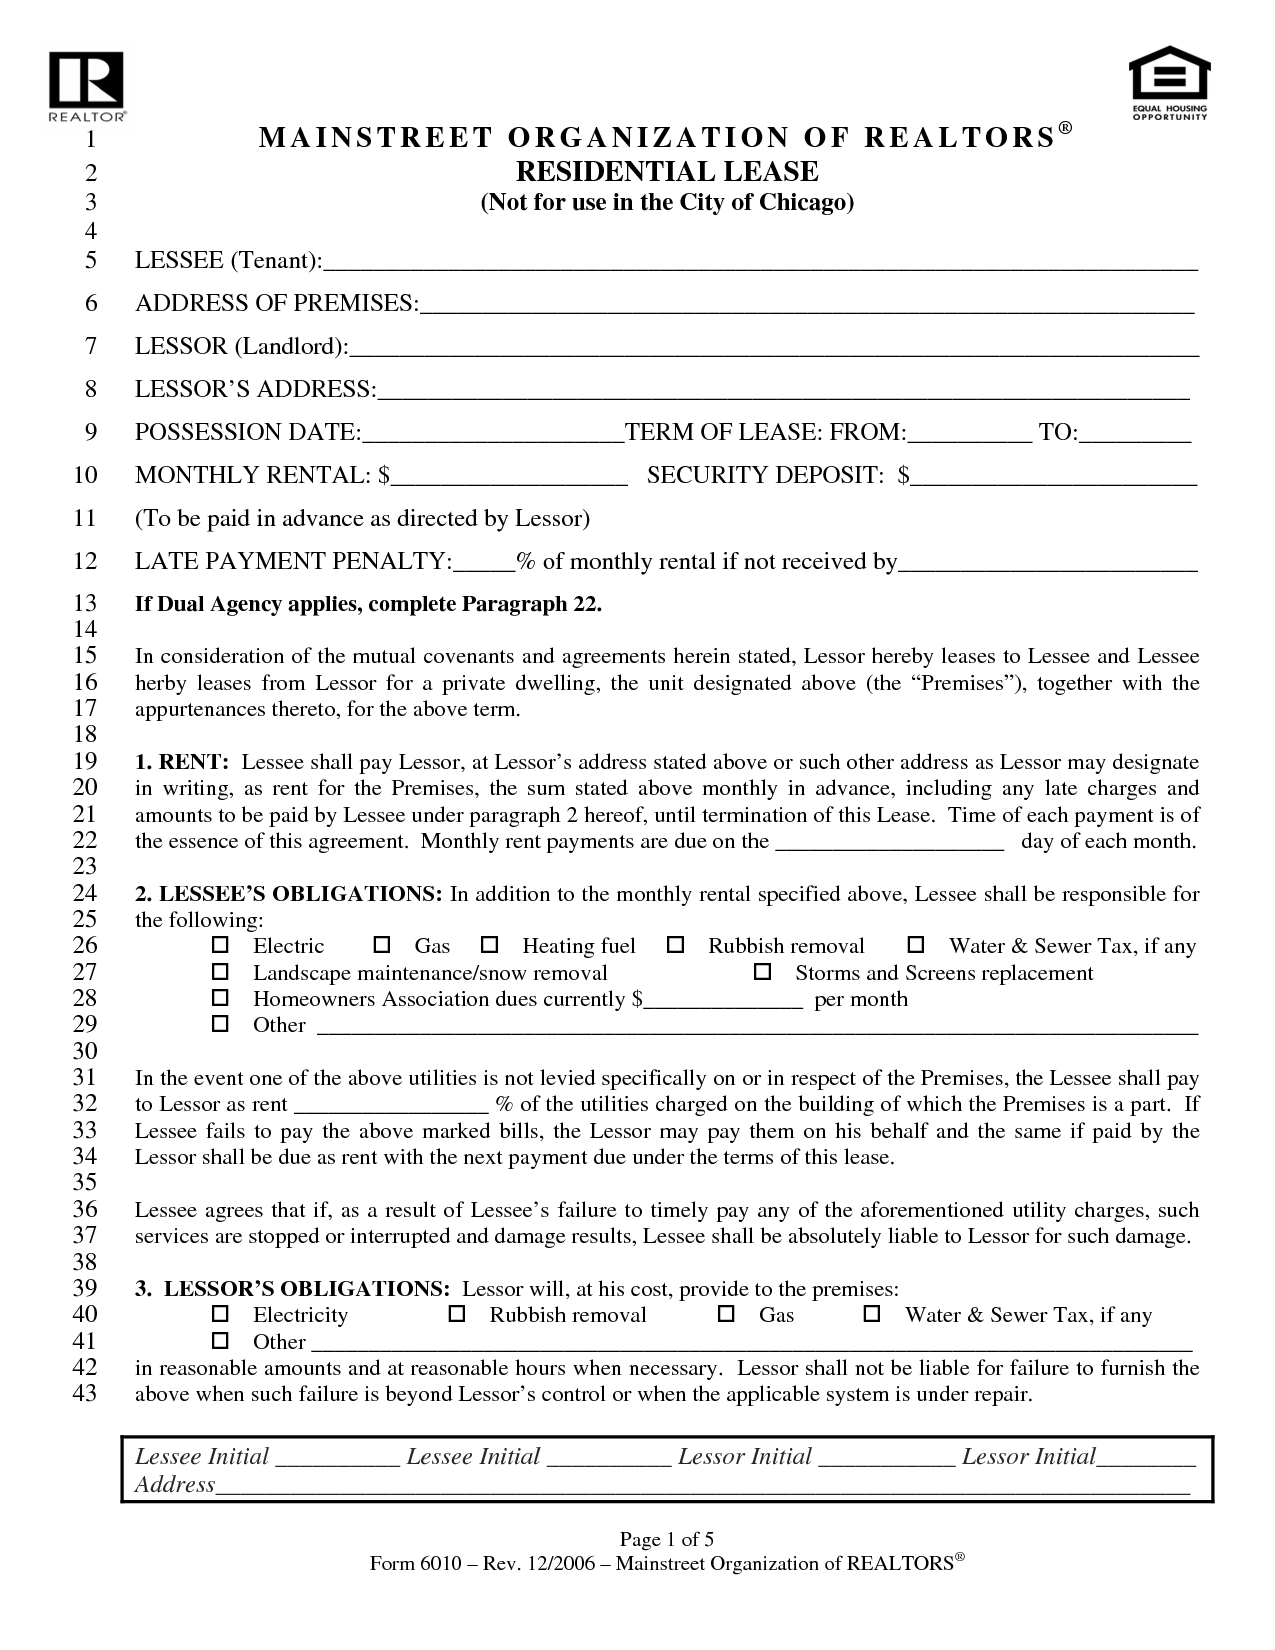 agreement-templates-appealing-residential-lease-agreement-template-sample-with-blank-and-editable-text-form-fill-pdf-doc-sample